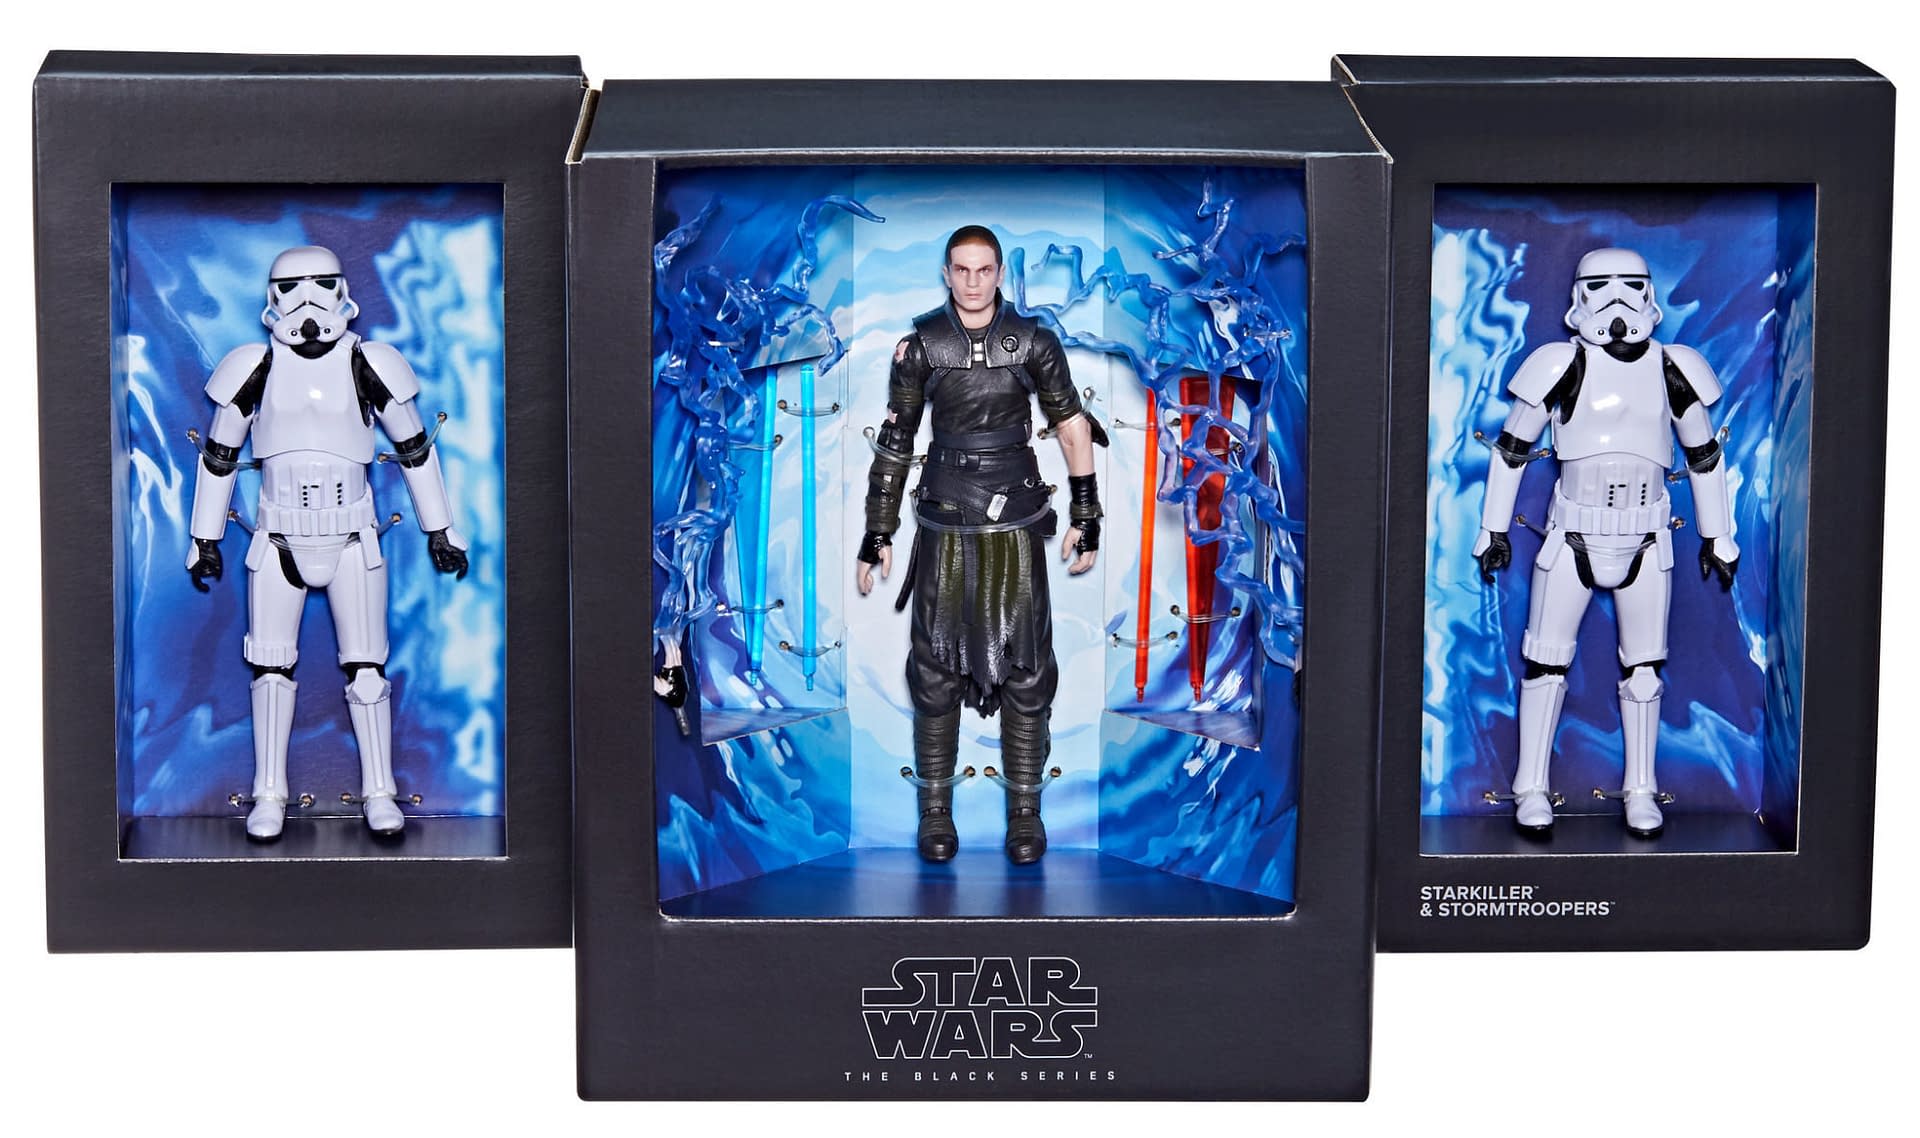 Star Wars: The Force Unleashed Deluxe Figure Set Revealed by Hasbro